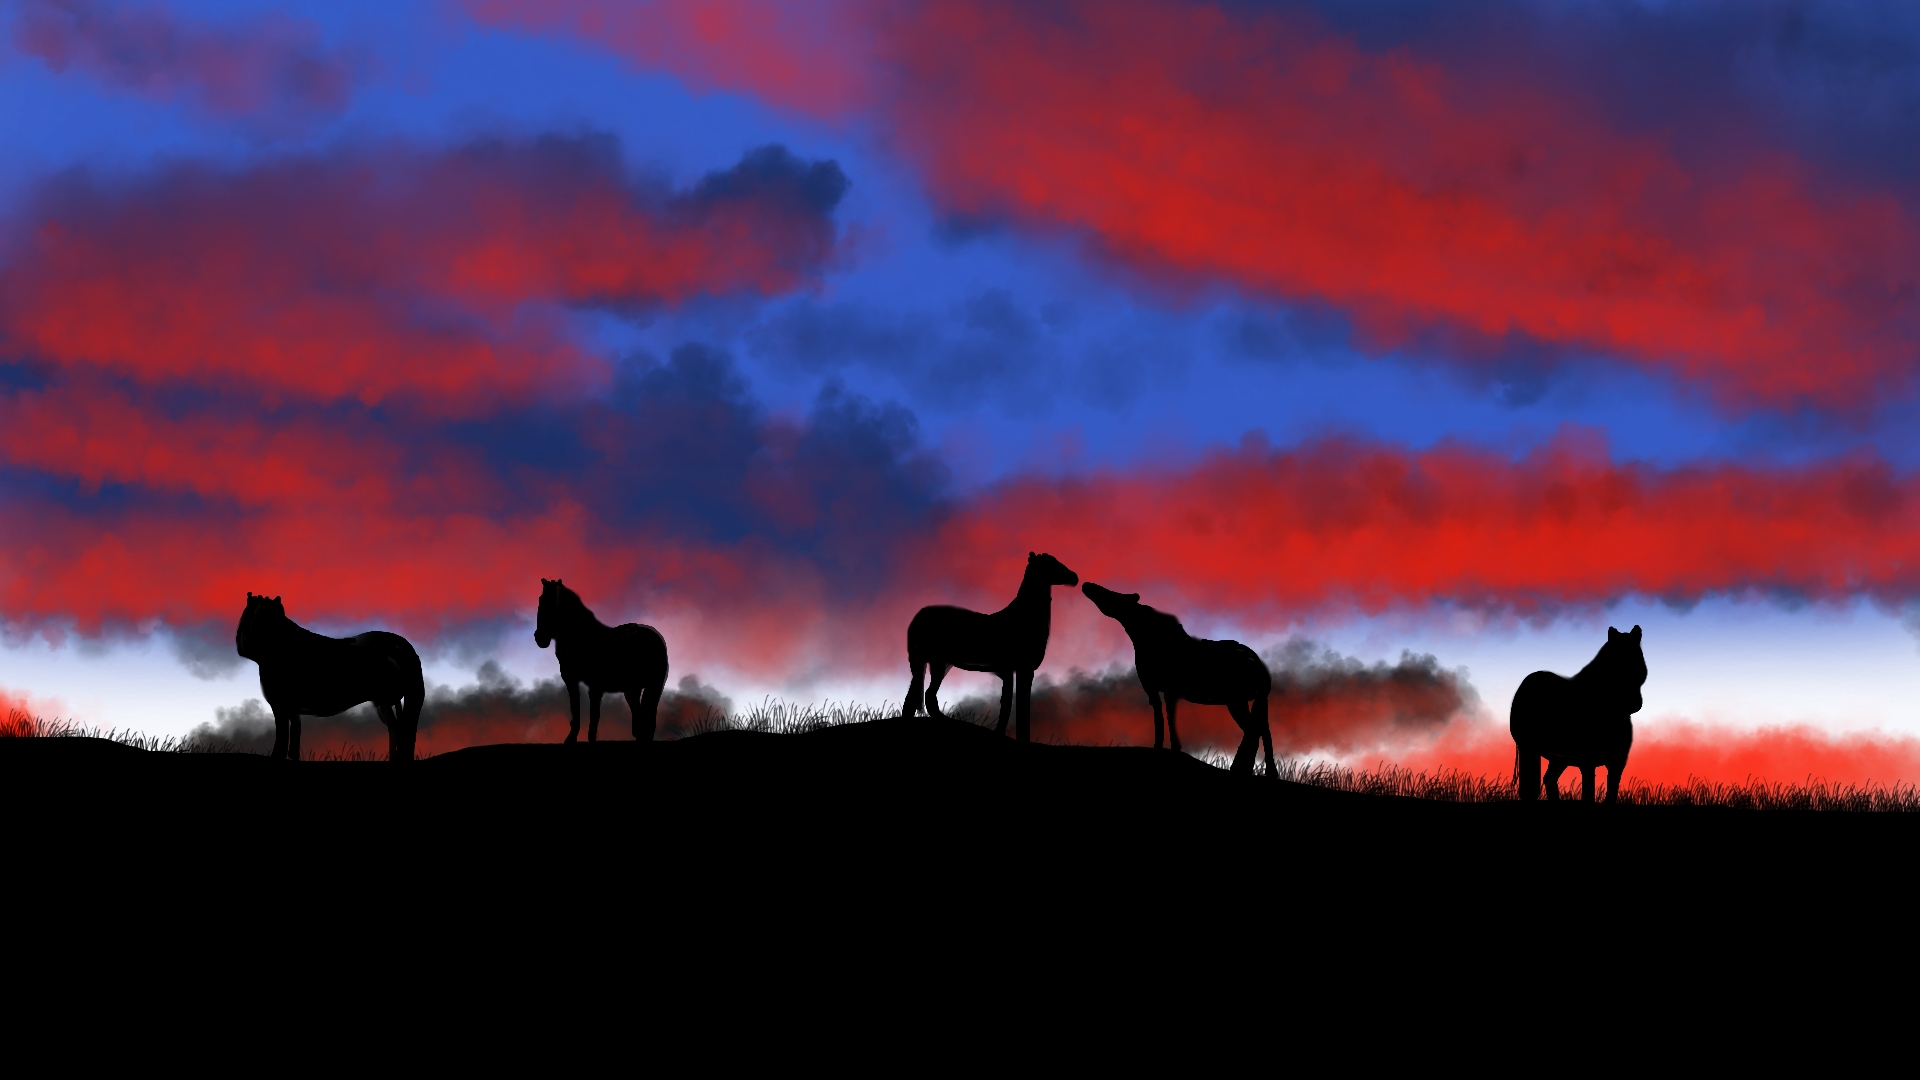 General 1920x1080 digital painting nature animals horse sky